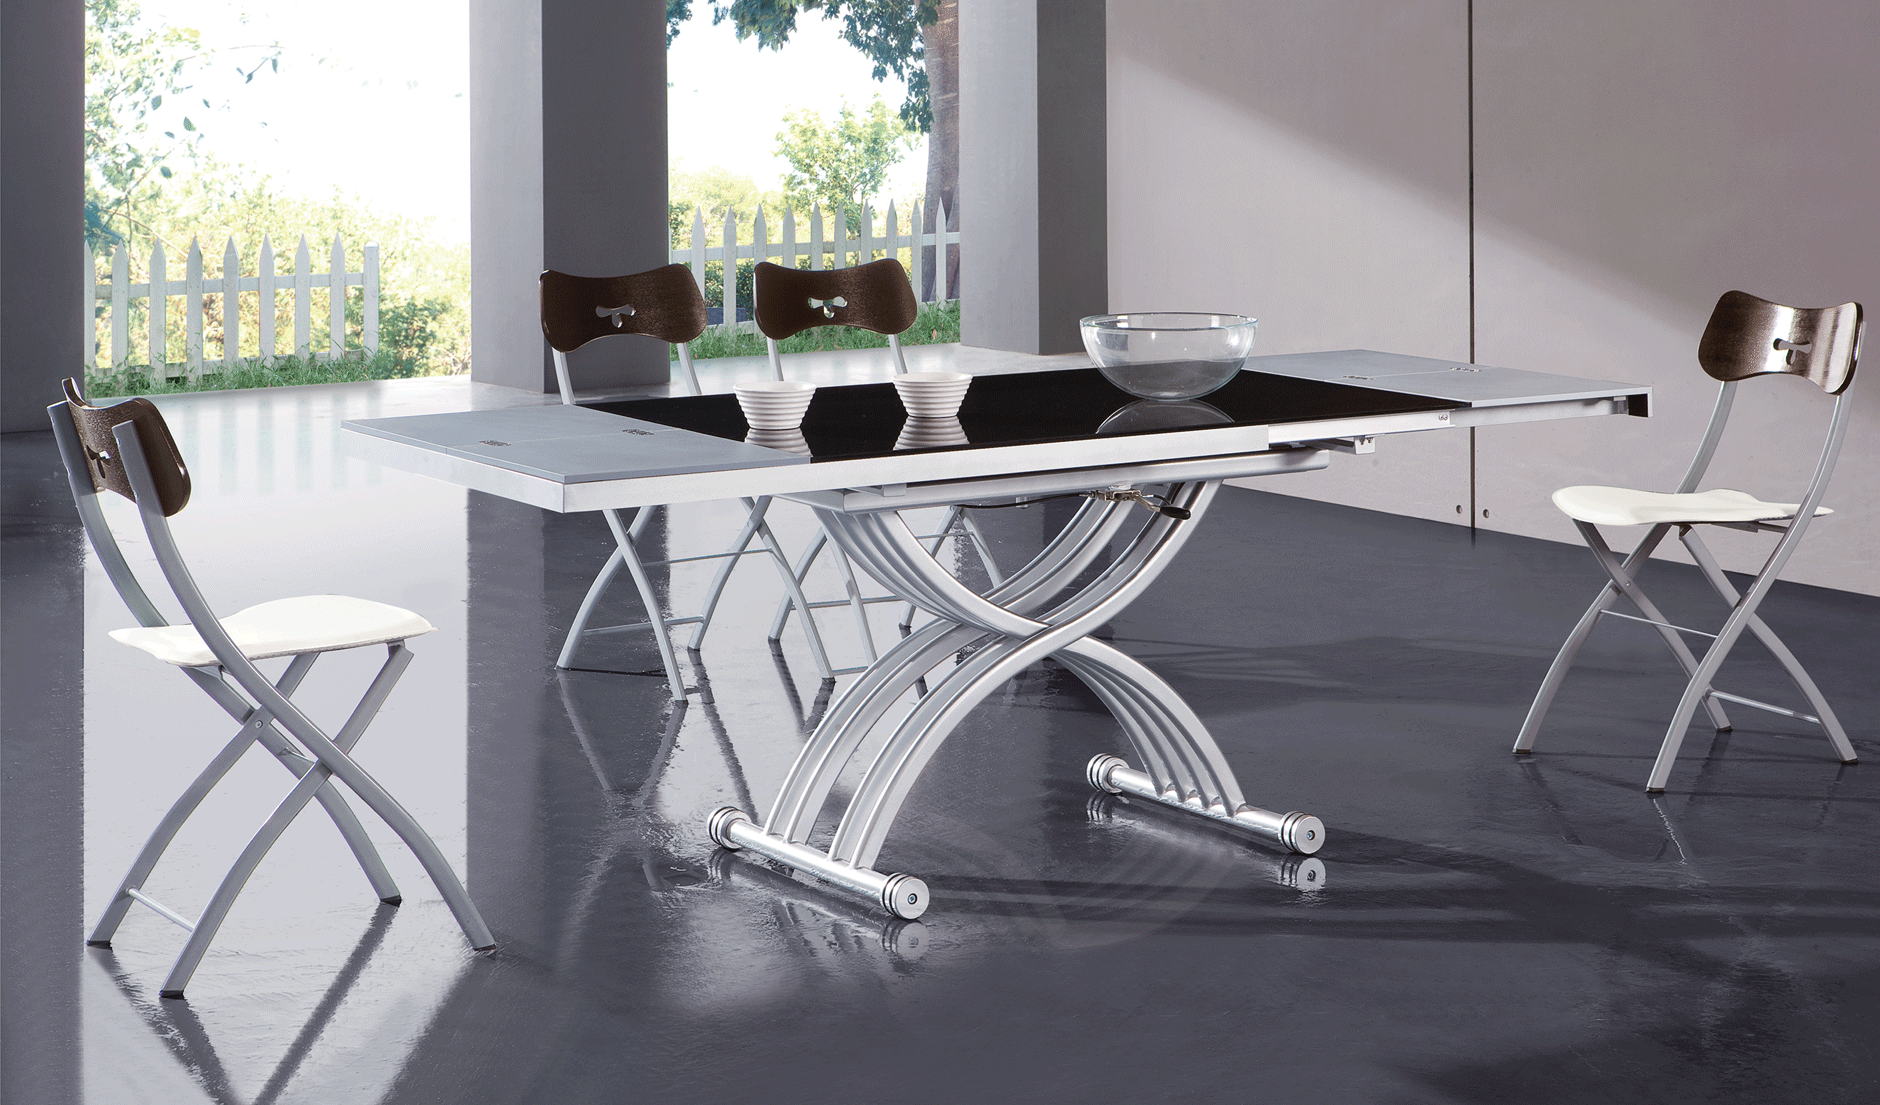 Dining Room Furniture Marble-Look Tables 2109 Table Transformer and 3147 Chairs